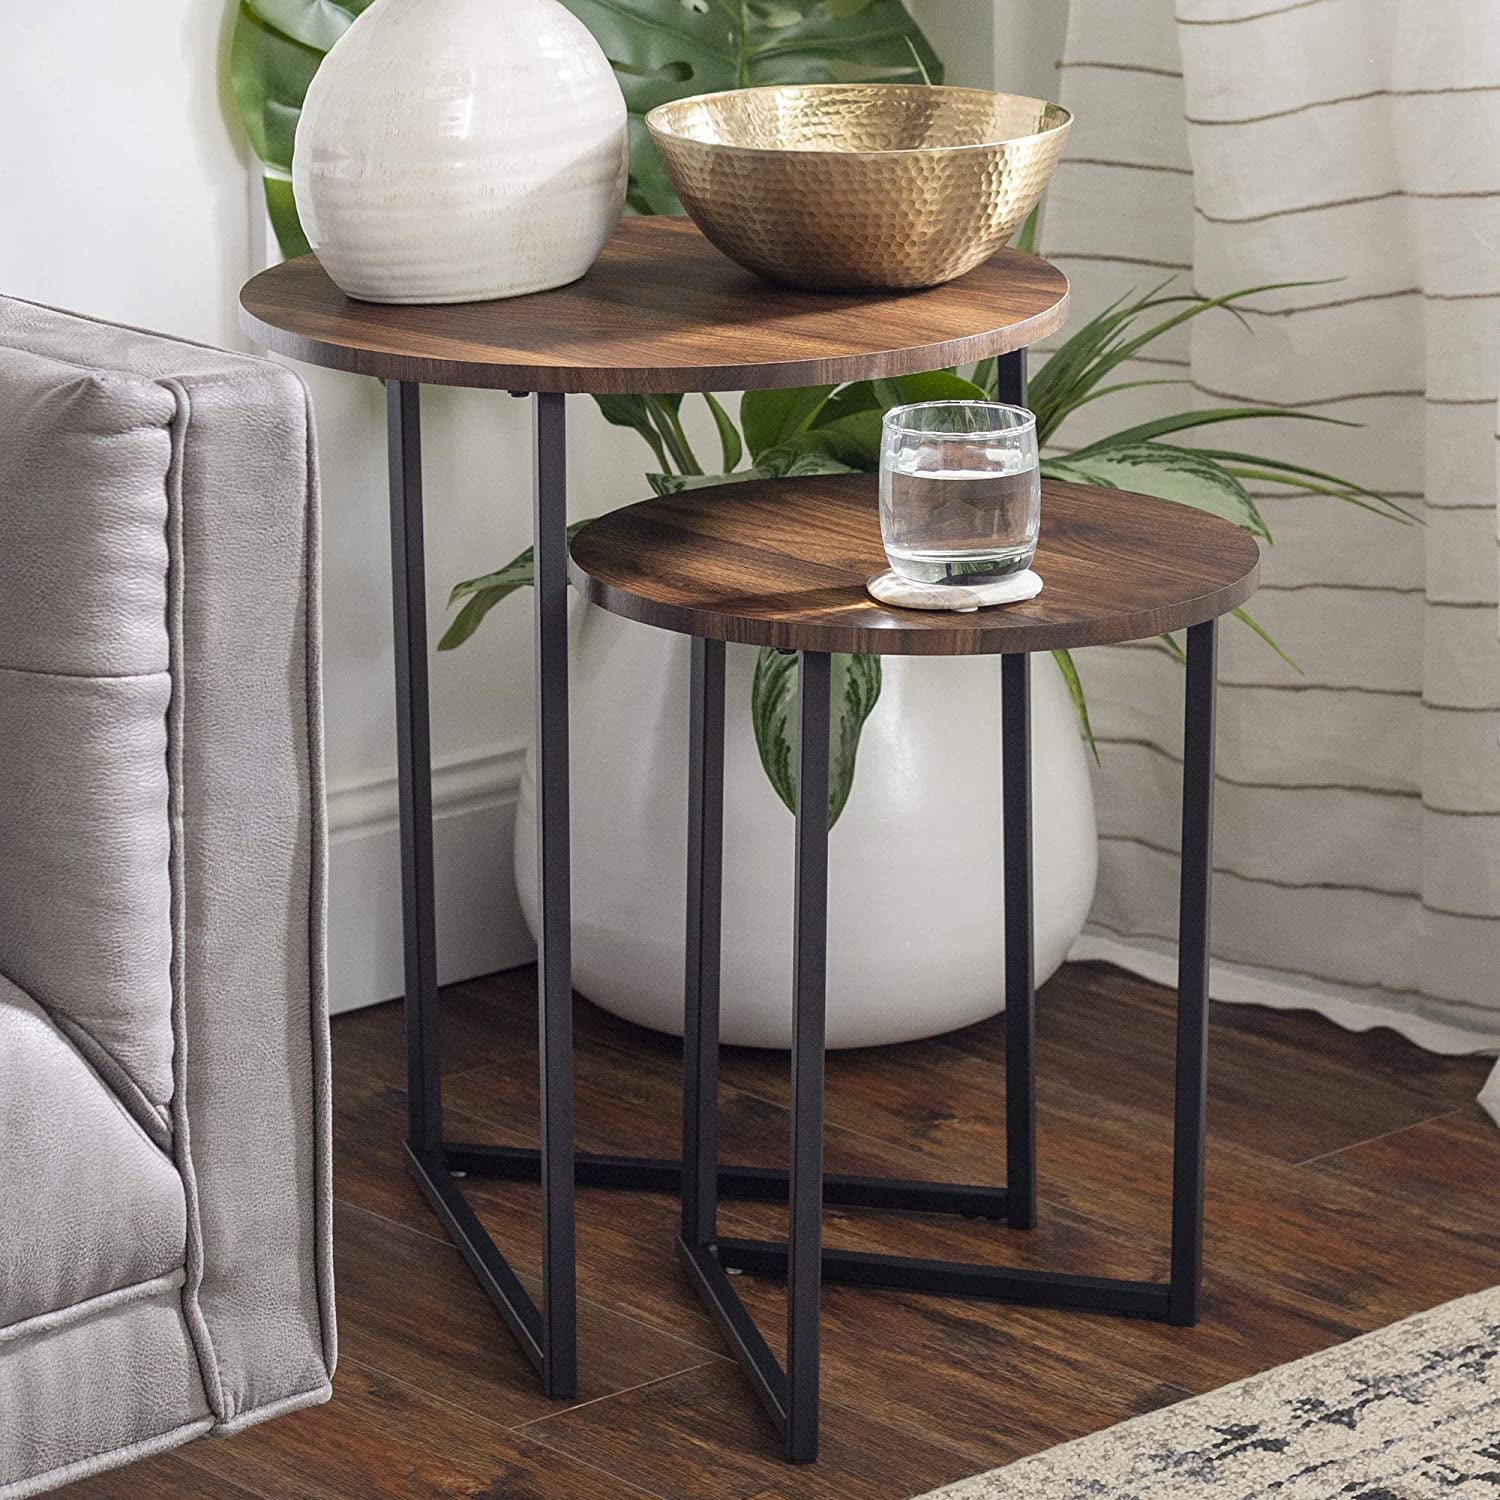 the two nesting tables holding a glass of water, bowl, and vase